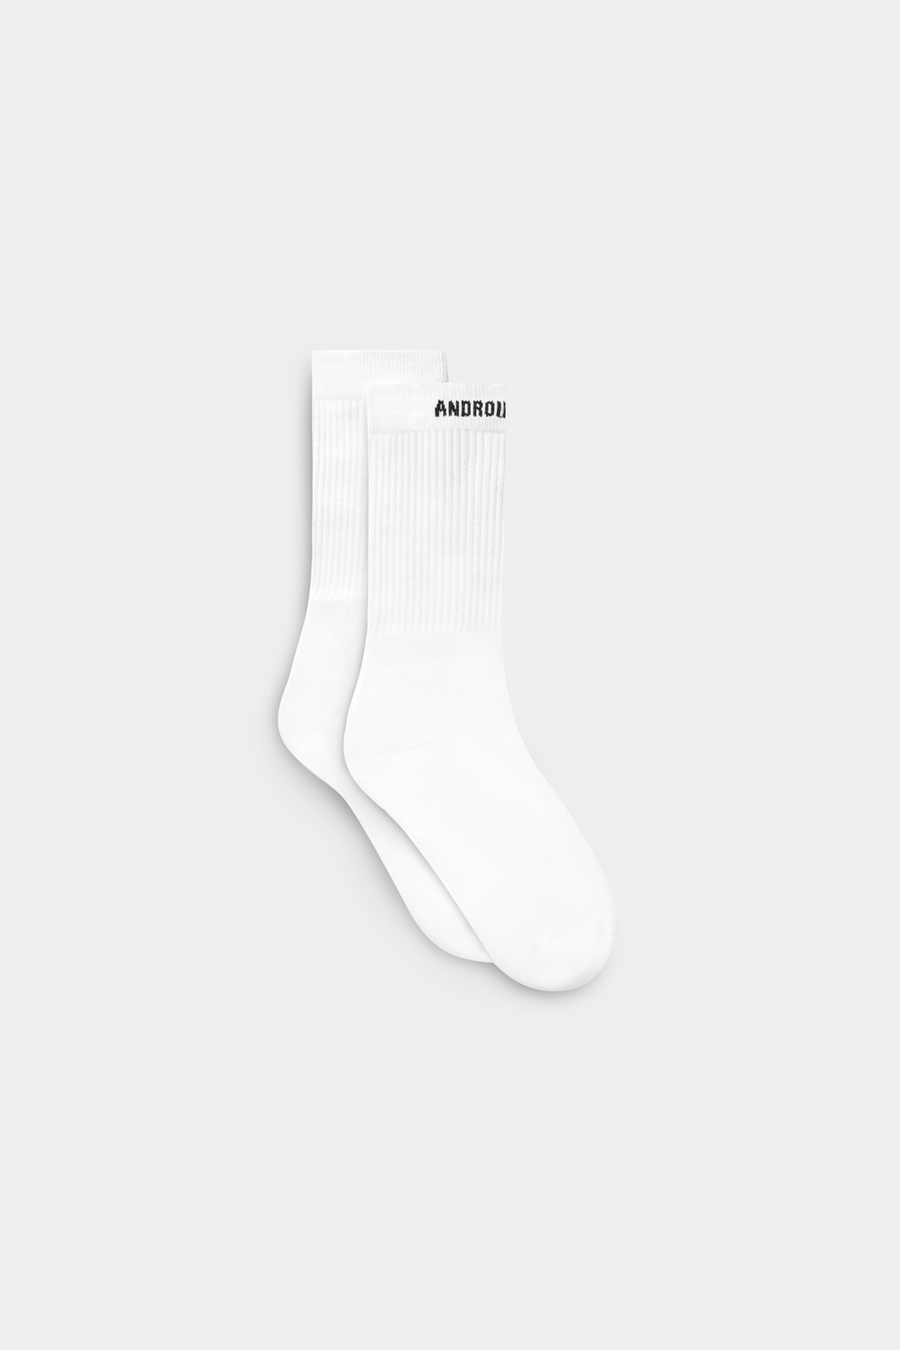 Buy the Android Homme AH Crew Sock in White at Intro. Spend £50 for free UK delivery. Official stockists. We ship worldwide.